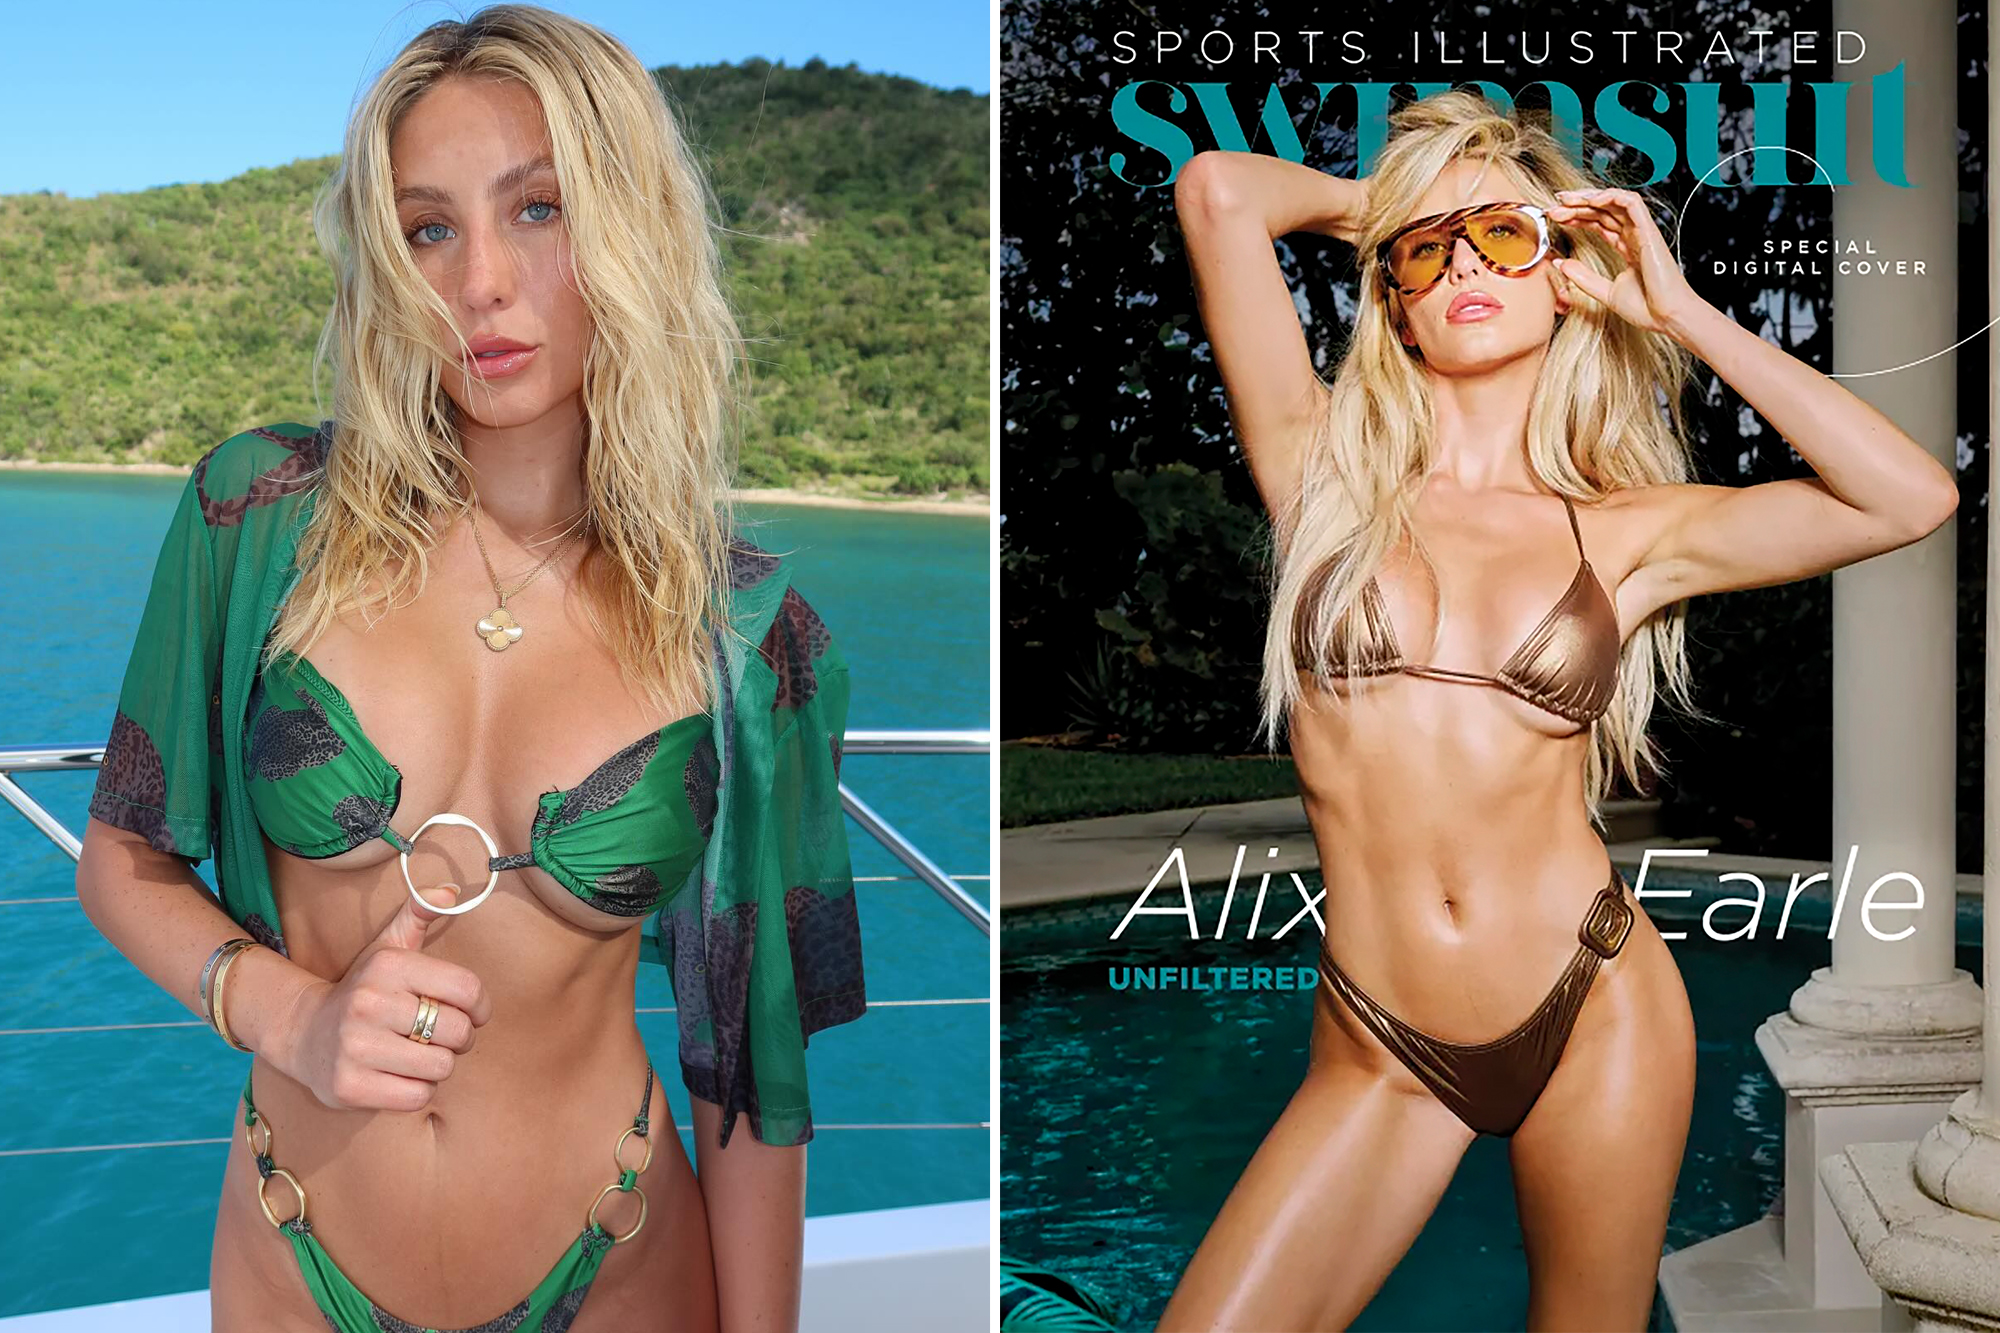 Alix Earle Makes Waves as First Digital Cover Model for Sports Illustrated Swimsuit Issue